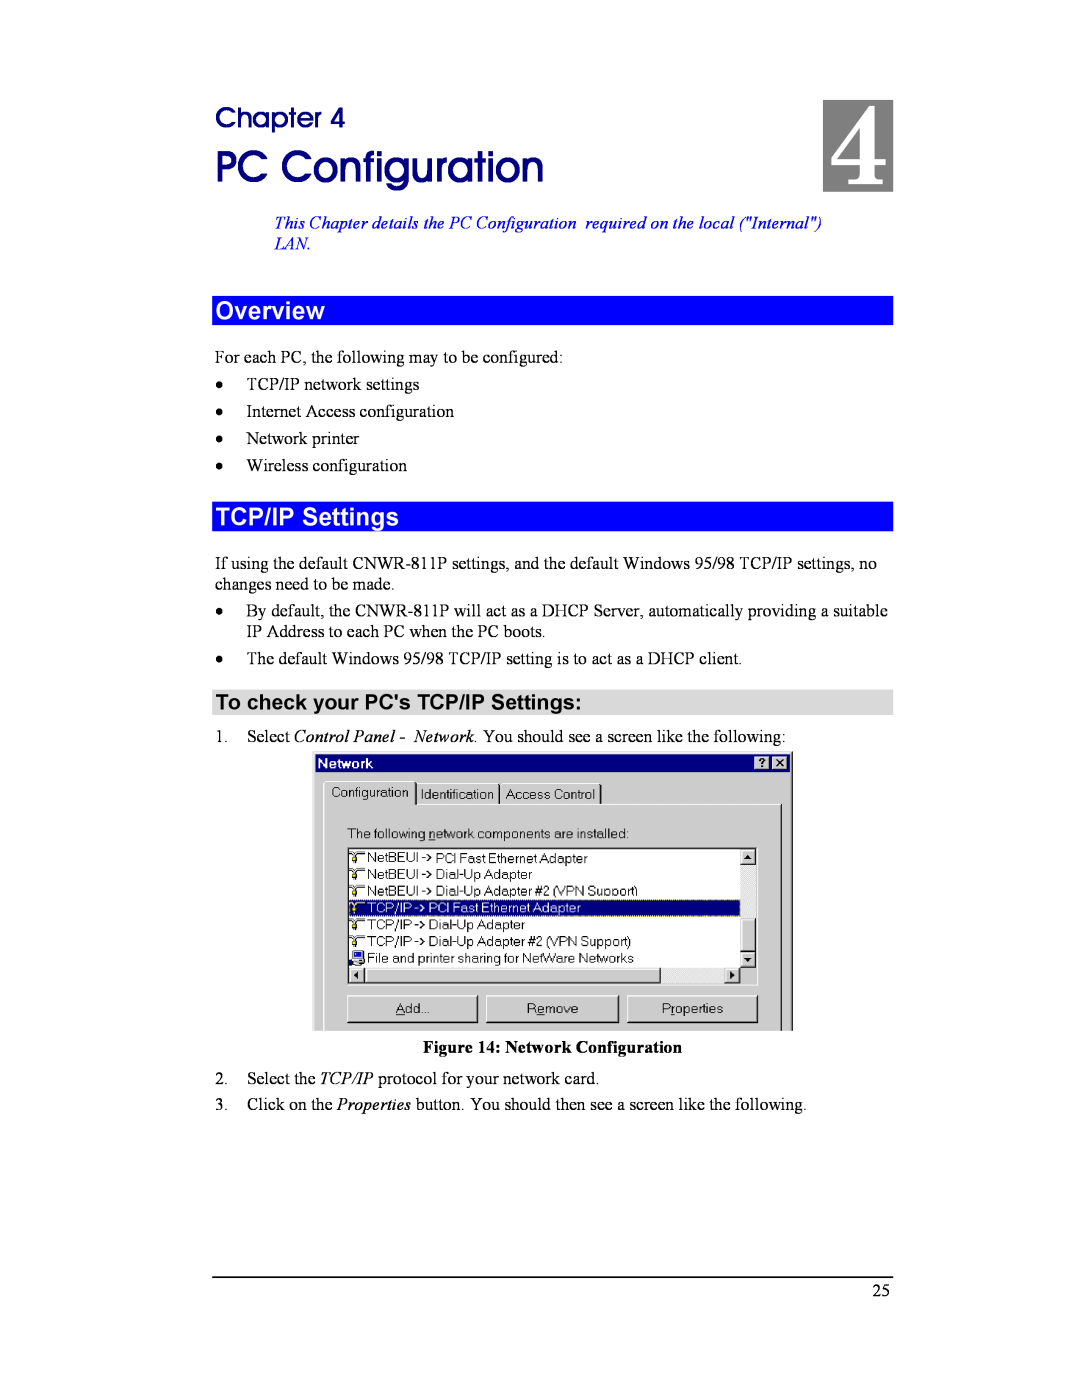 CNET CNWR-811P manual PC Configuration, To check your PCs TCP/IP Settings, Chapter, Overview 